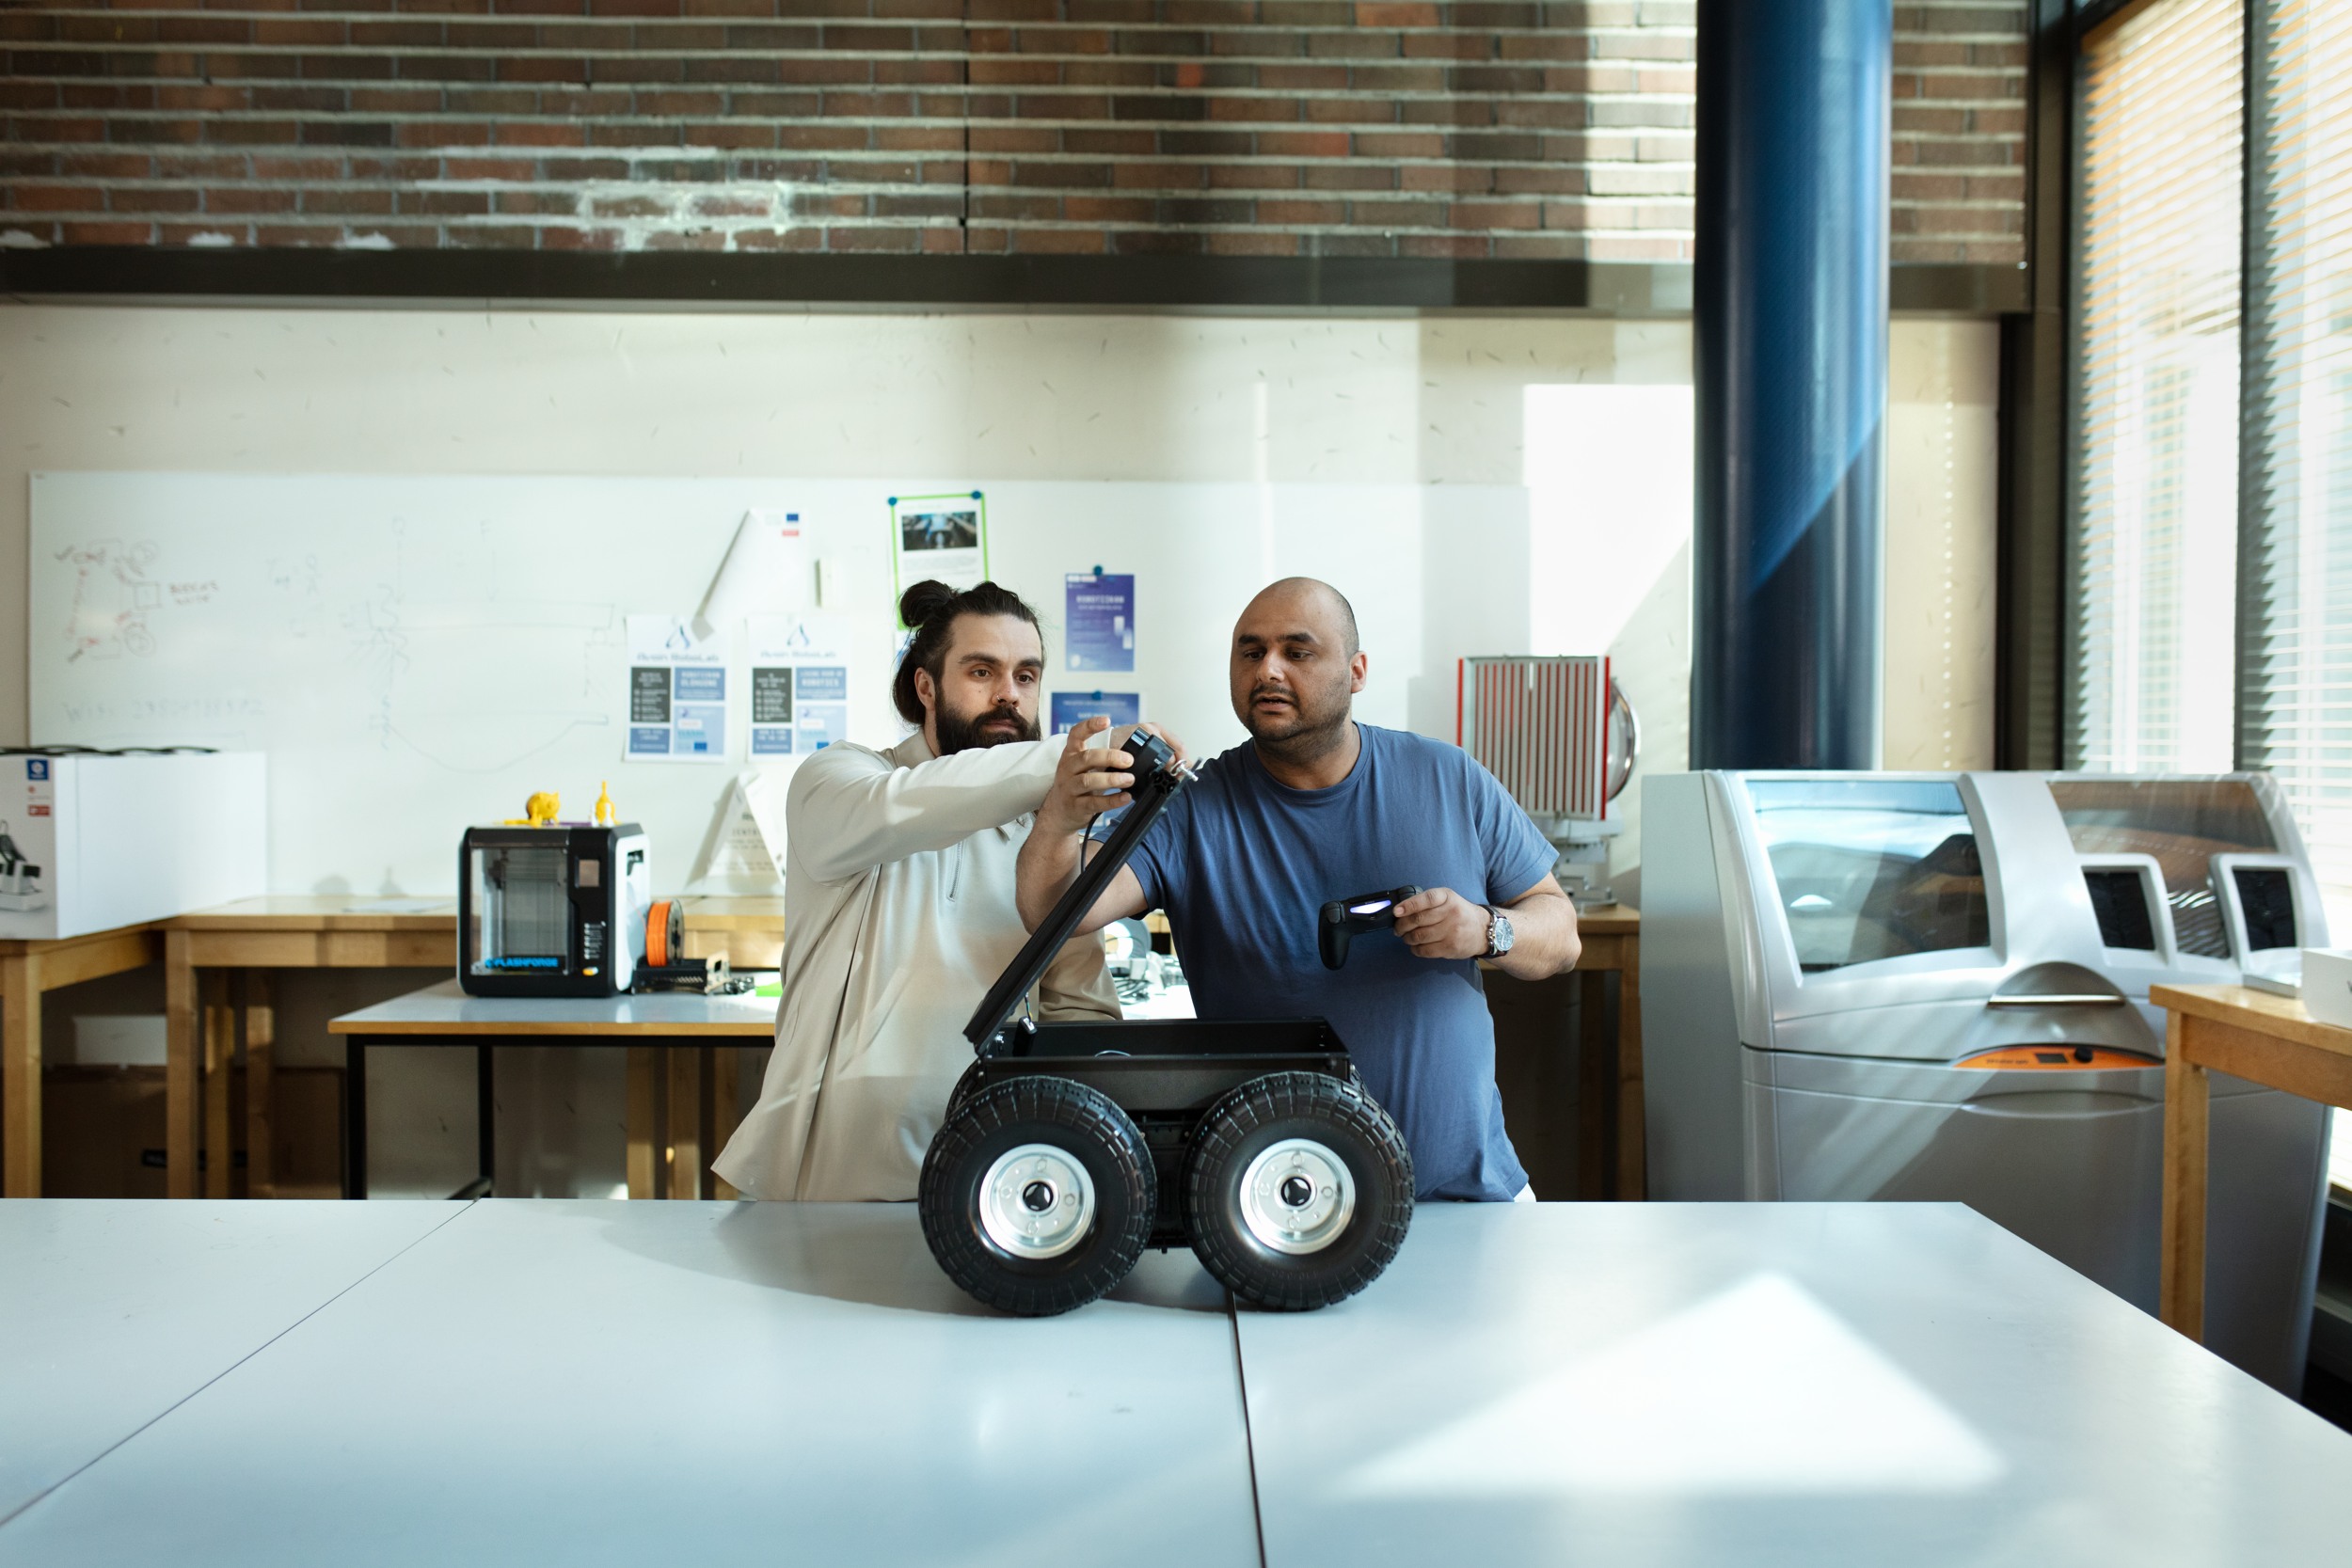 Two persons testing a robot with wheels indoors.